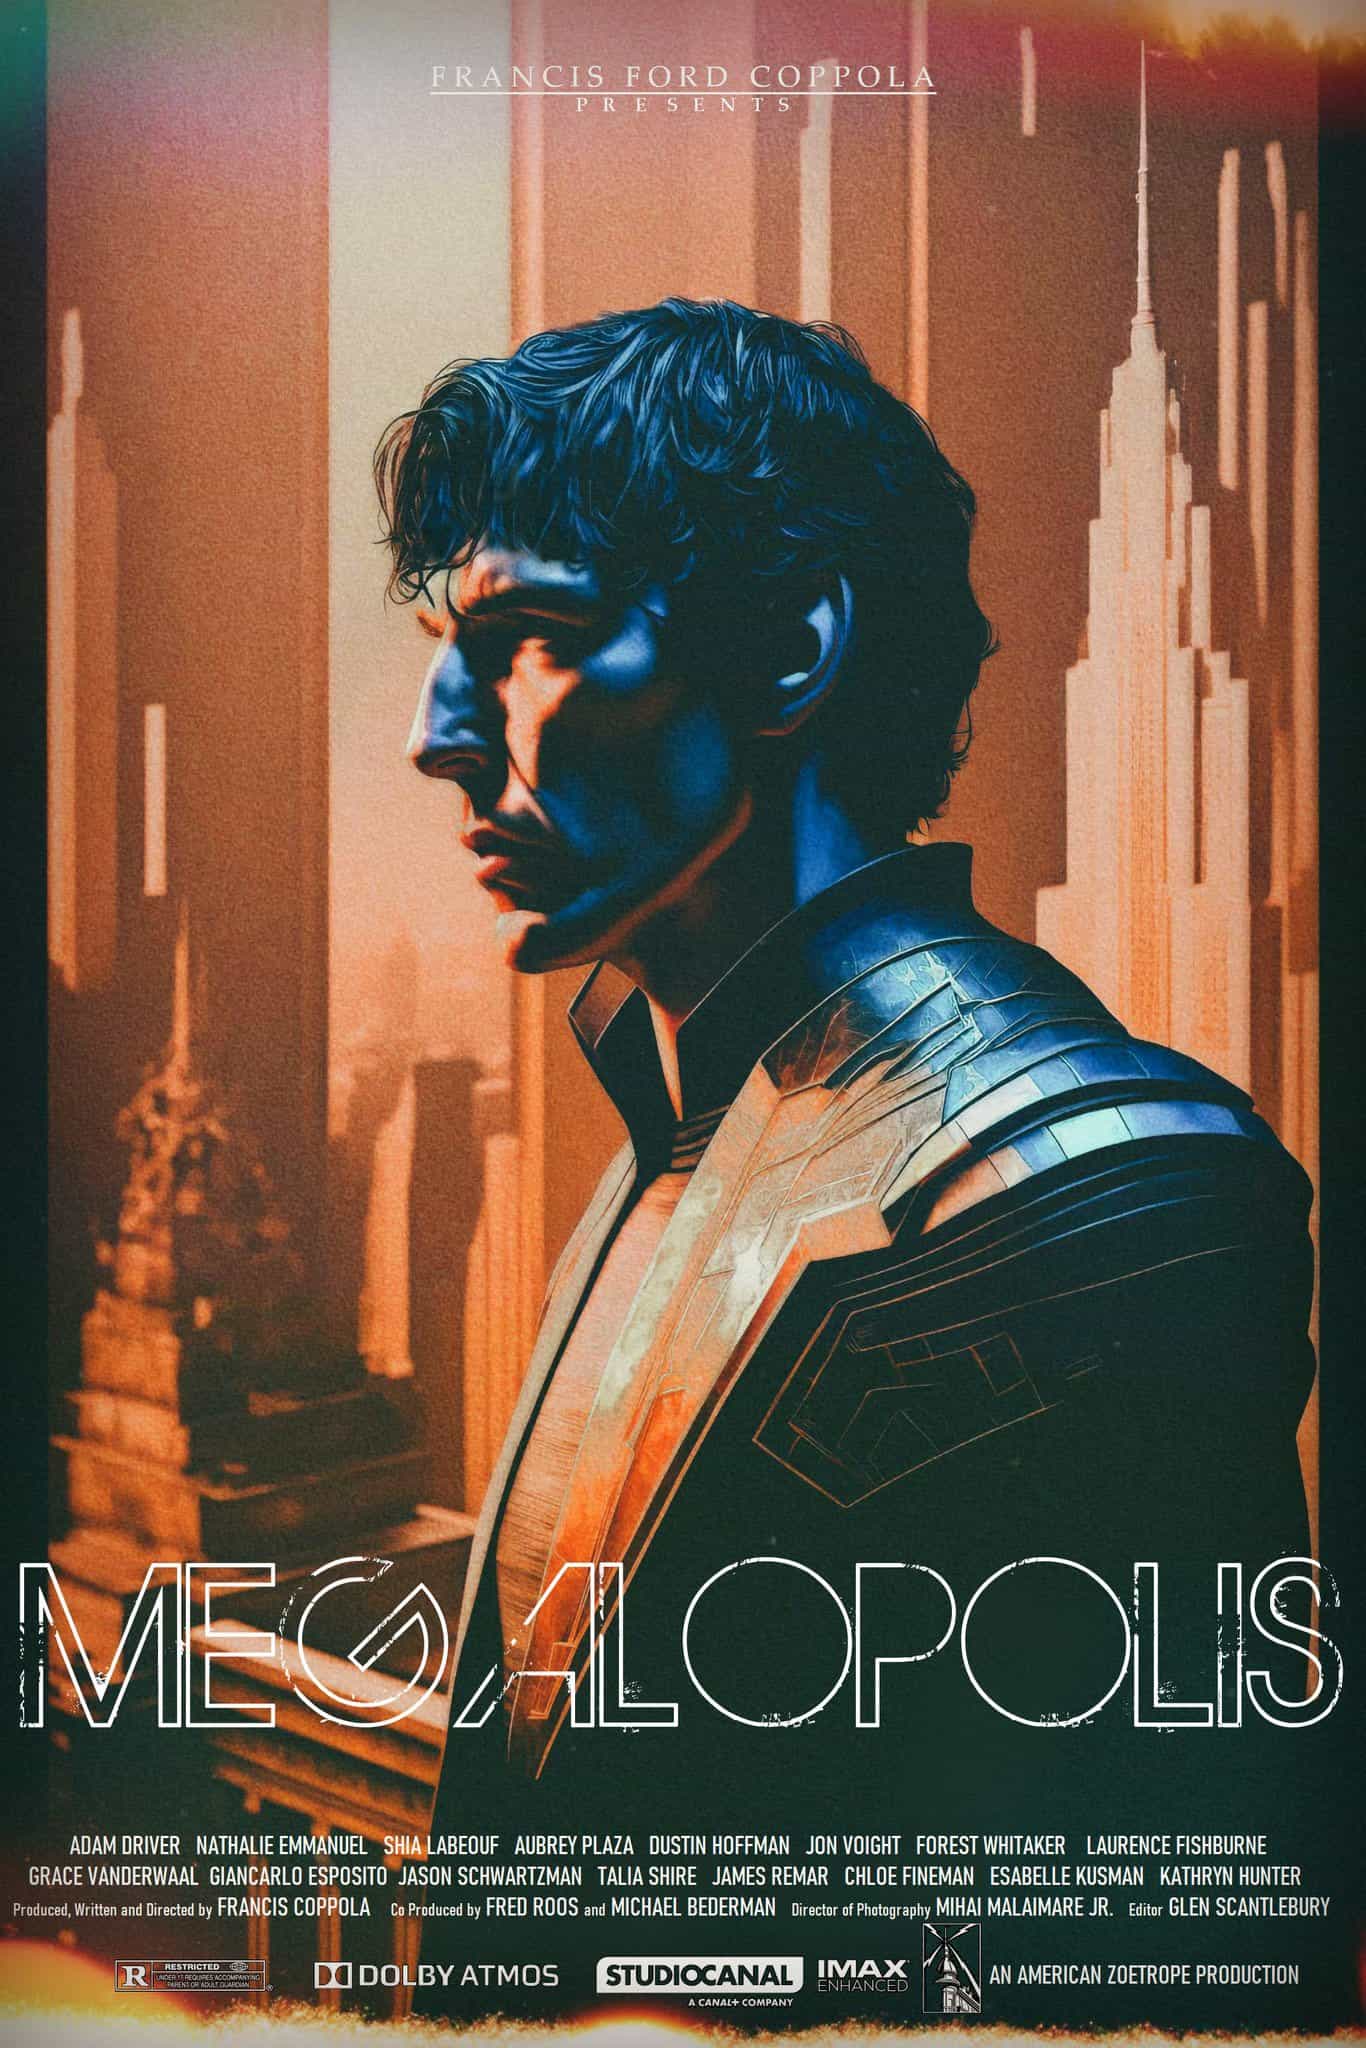 Check out the new trailer for upcoming movie Megalopolis which stars Aubrey Plaza and Adam Driver #megalopolis